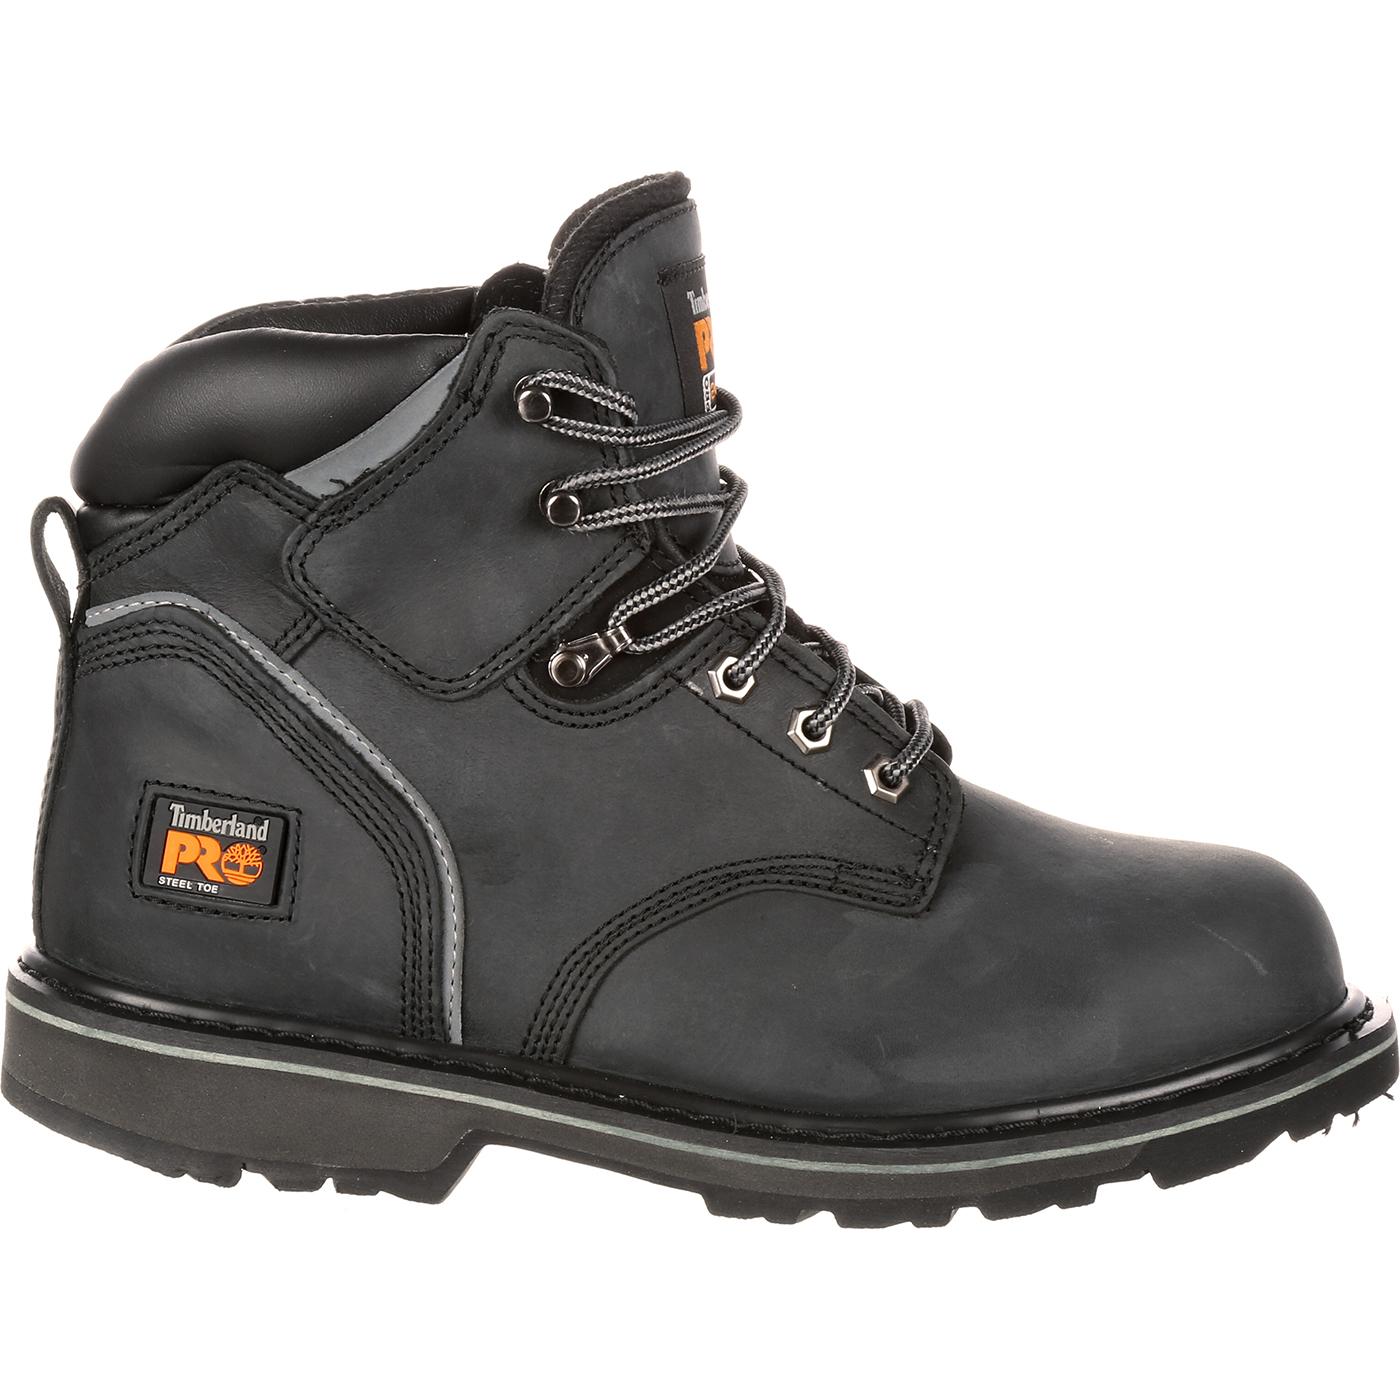 Timberland PRO 6 inch Sport Work Boot w/ Oil Resistant #33032